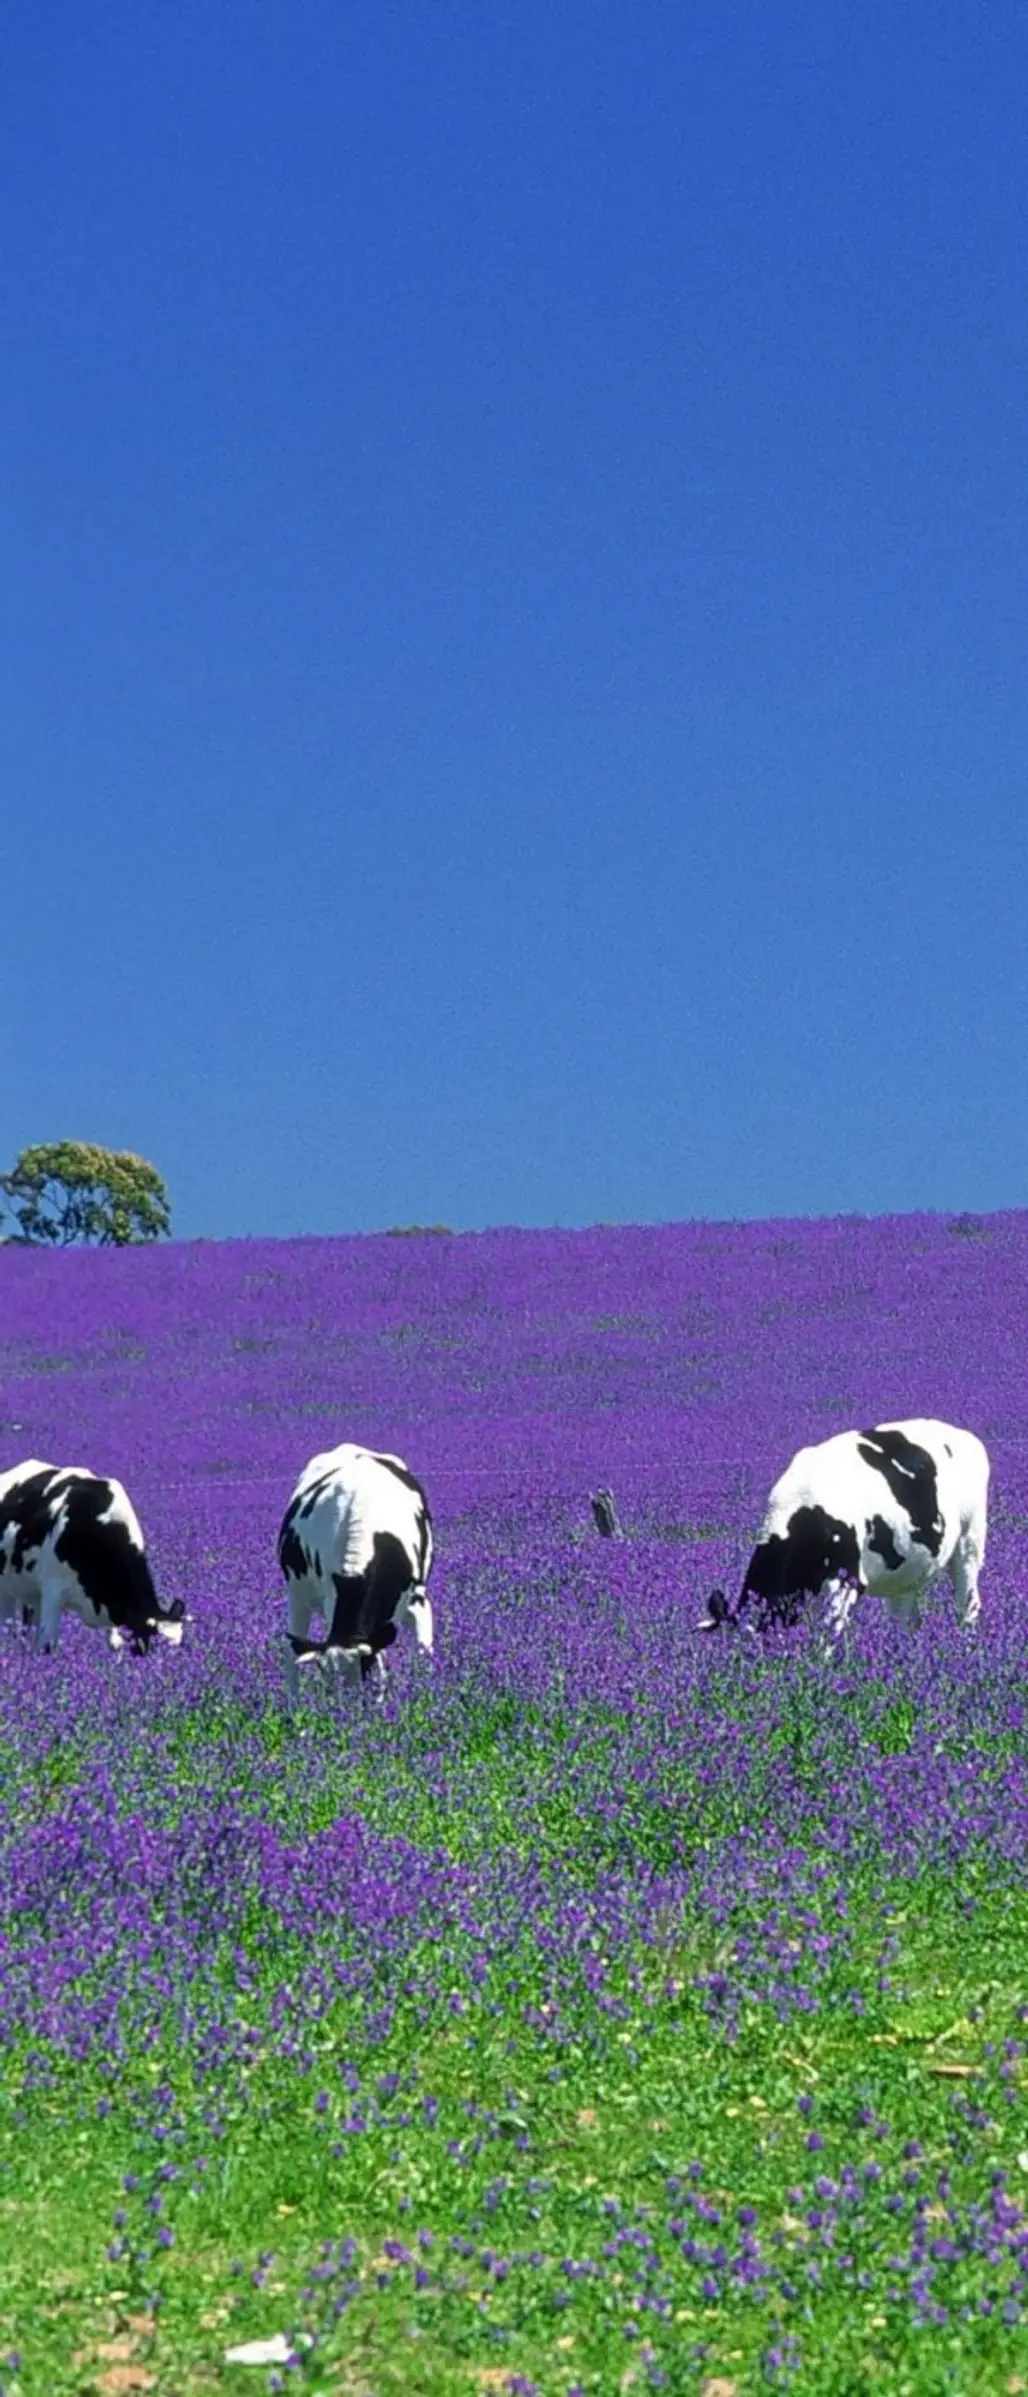 Cows Grazing in Salvation Jane Pasture, Clare Valley,